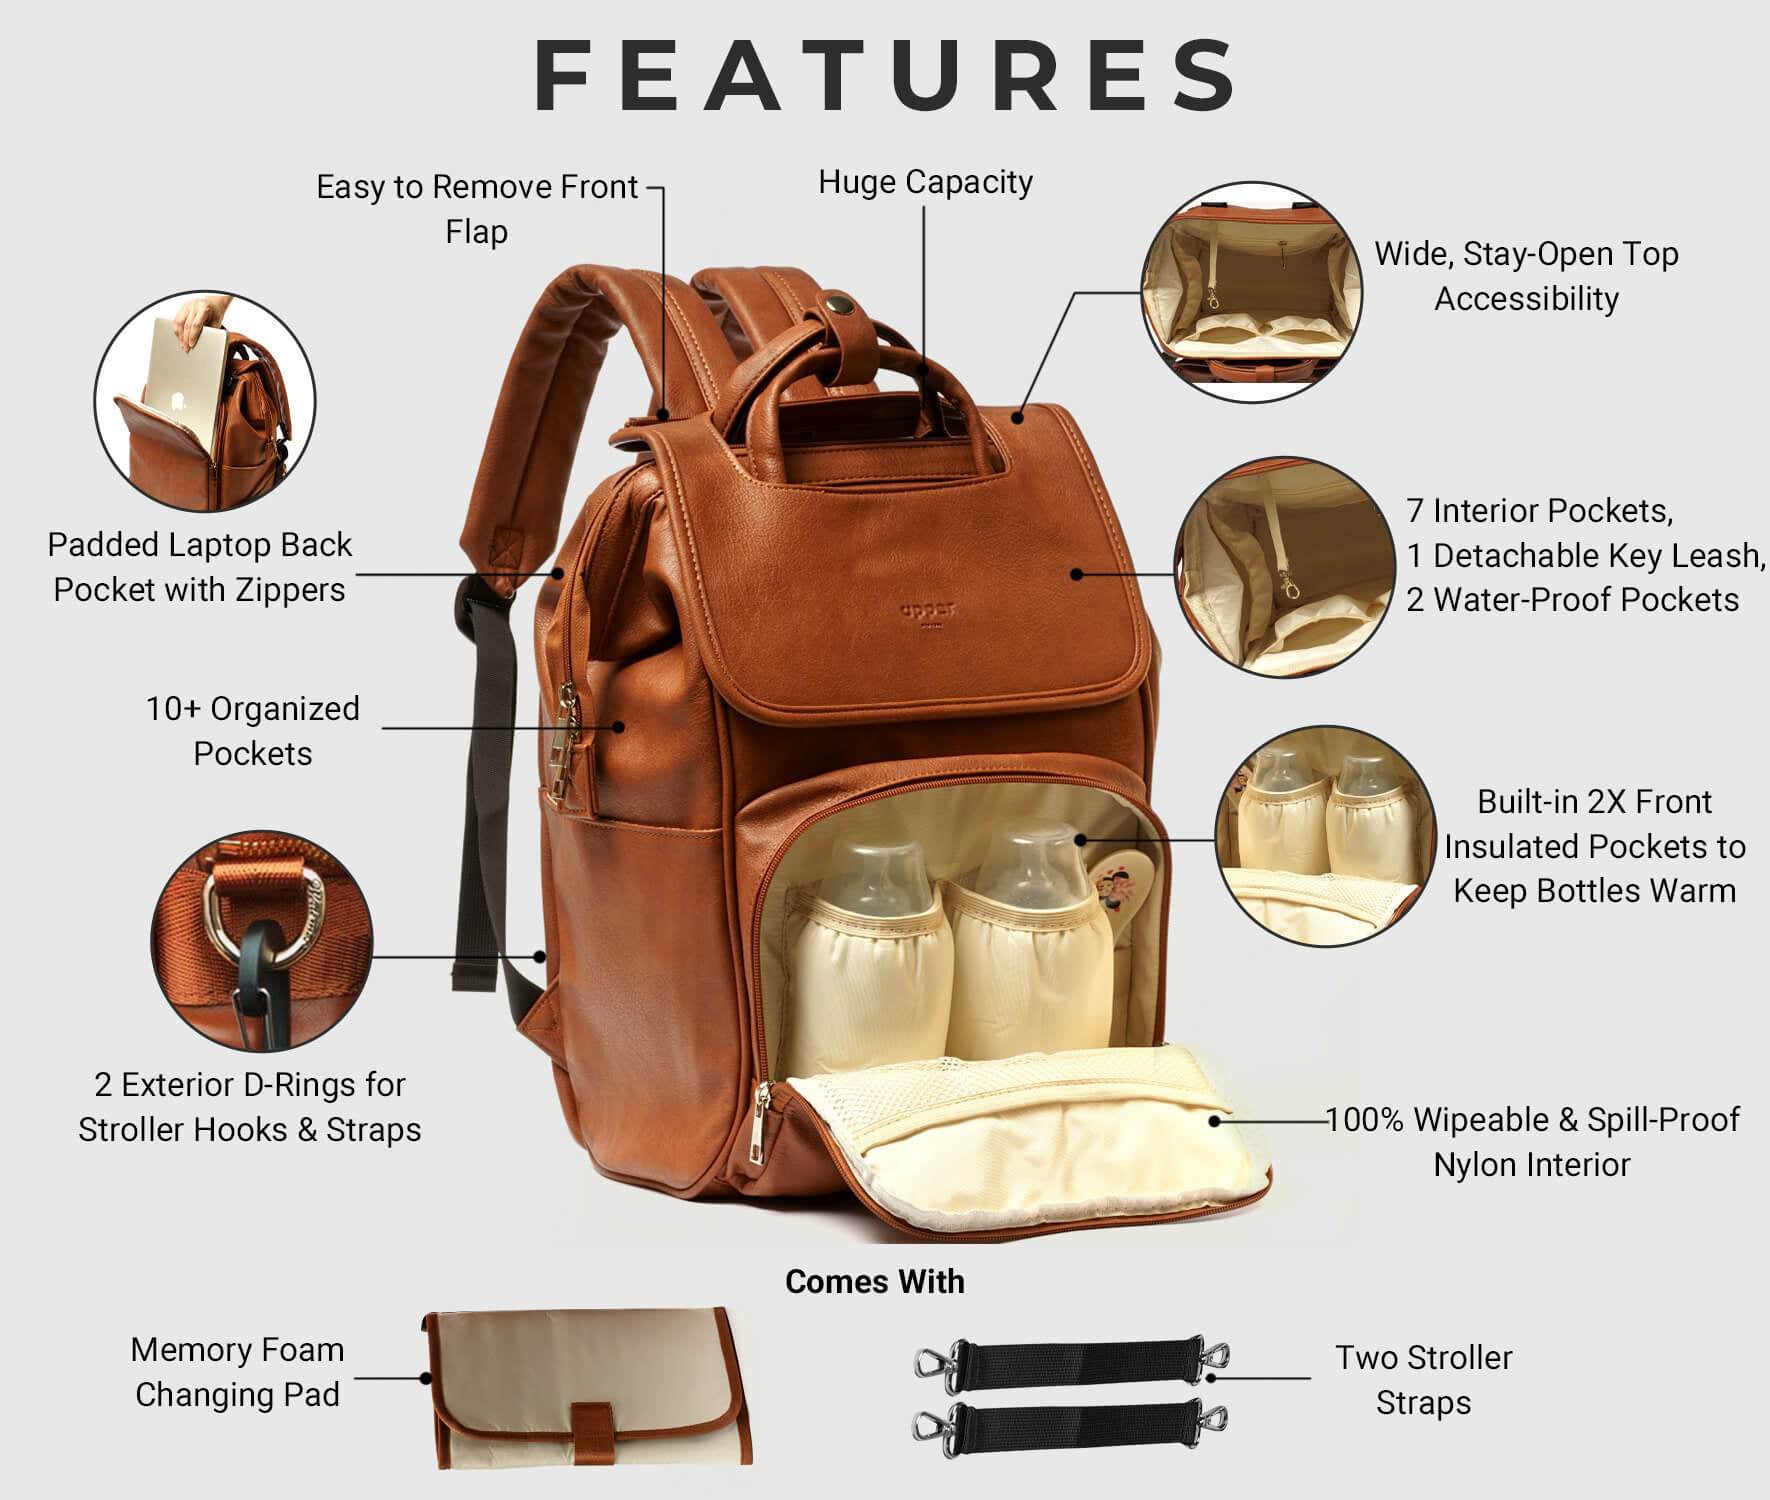 The Ultimate Stylish Diaper Bag Guide